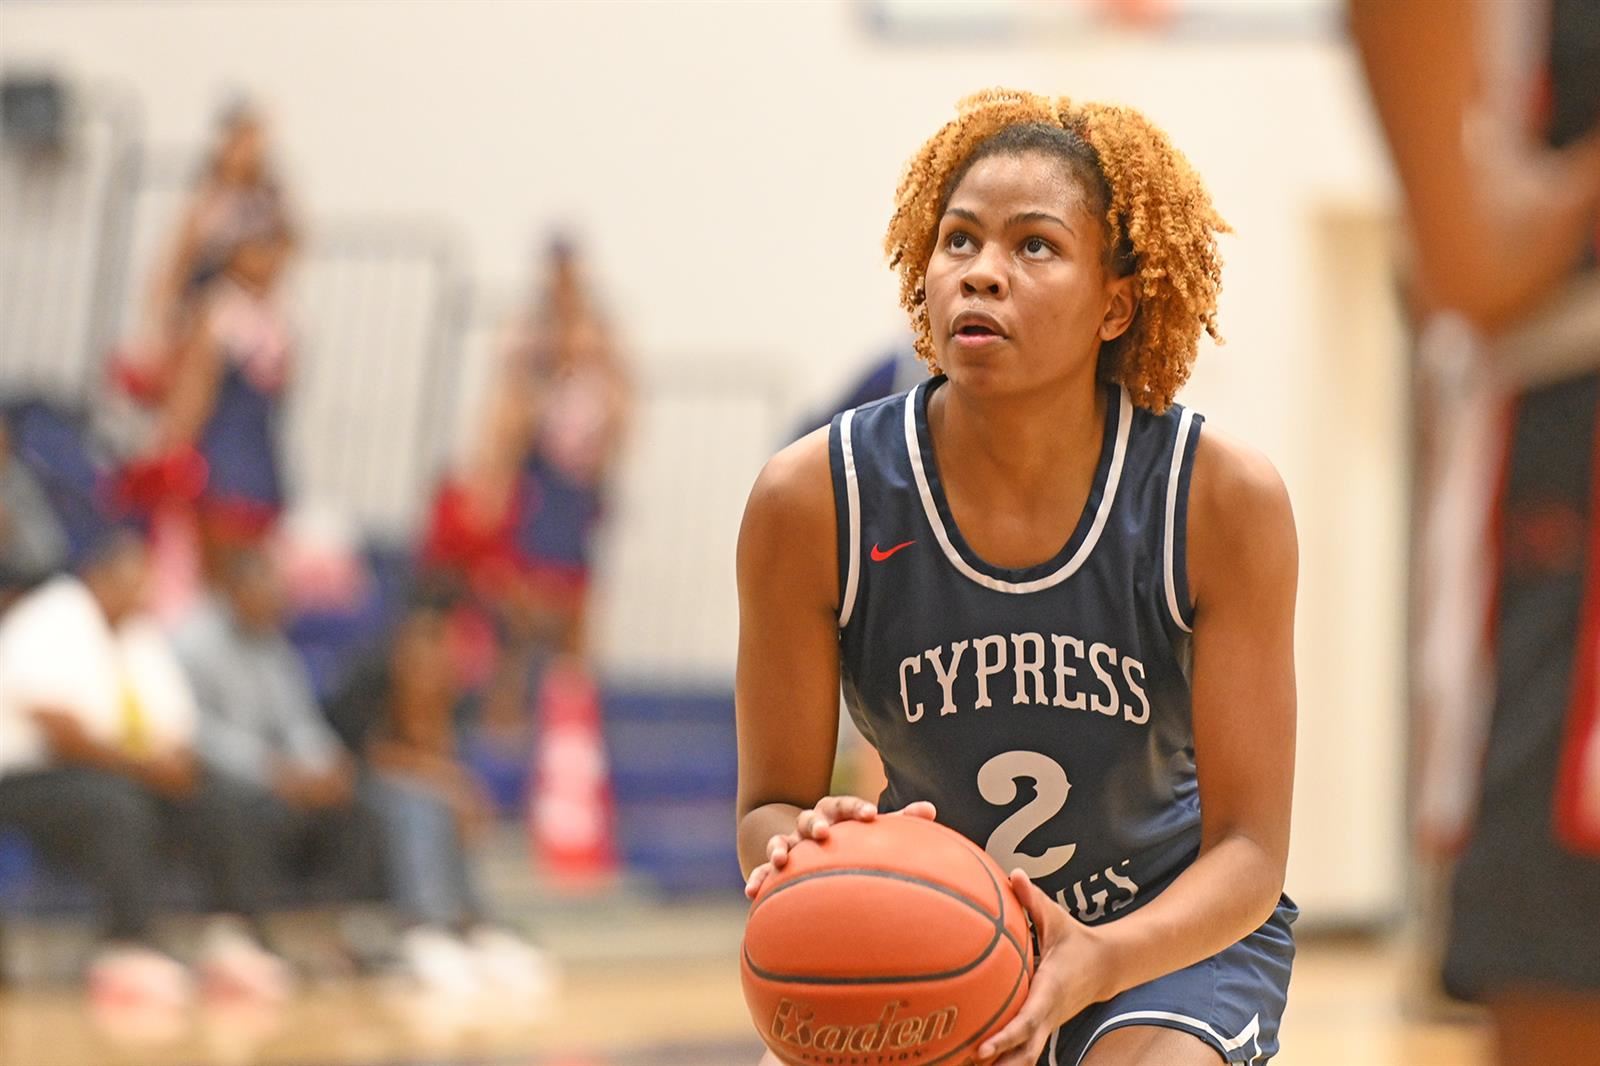 Cypress Springs High School sophomore Ayla McDowell was named the District 16-6A Girls’ Basketball Most Valuable Player.